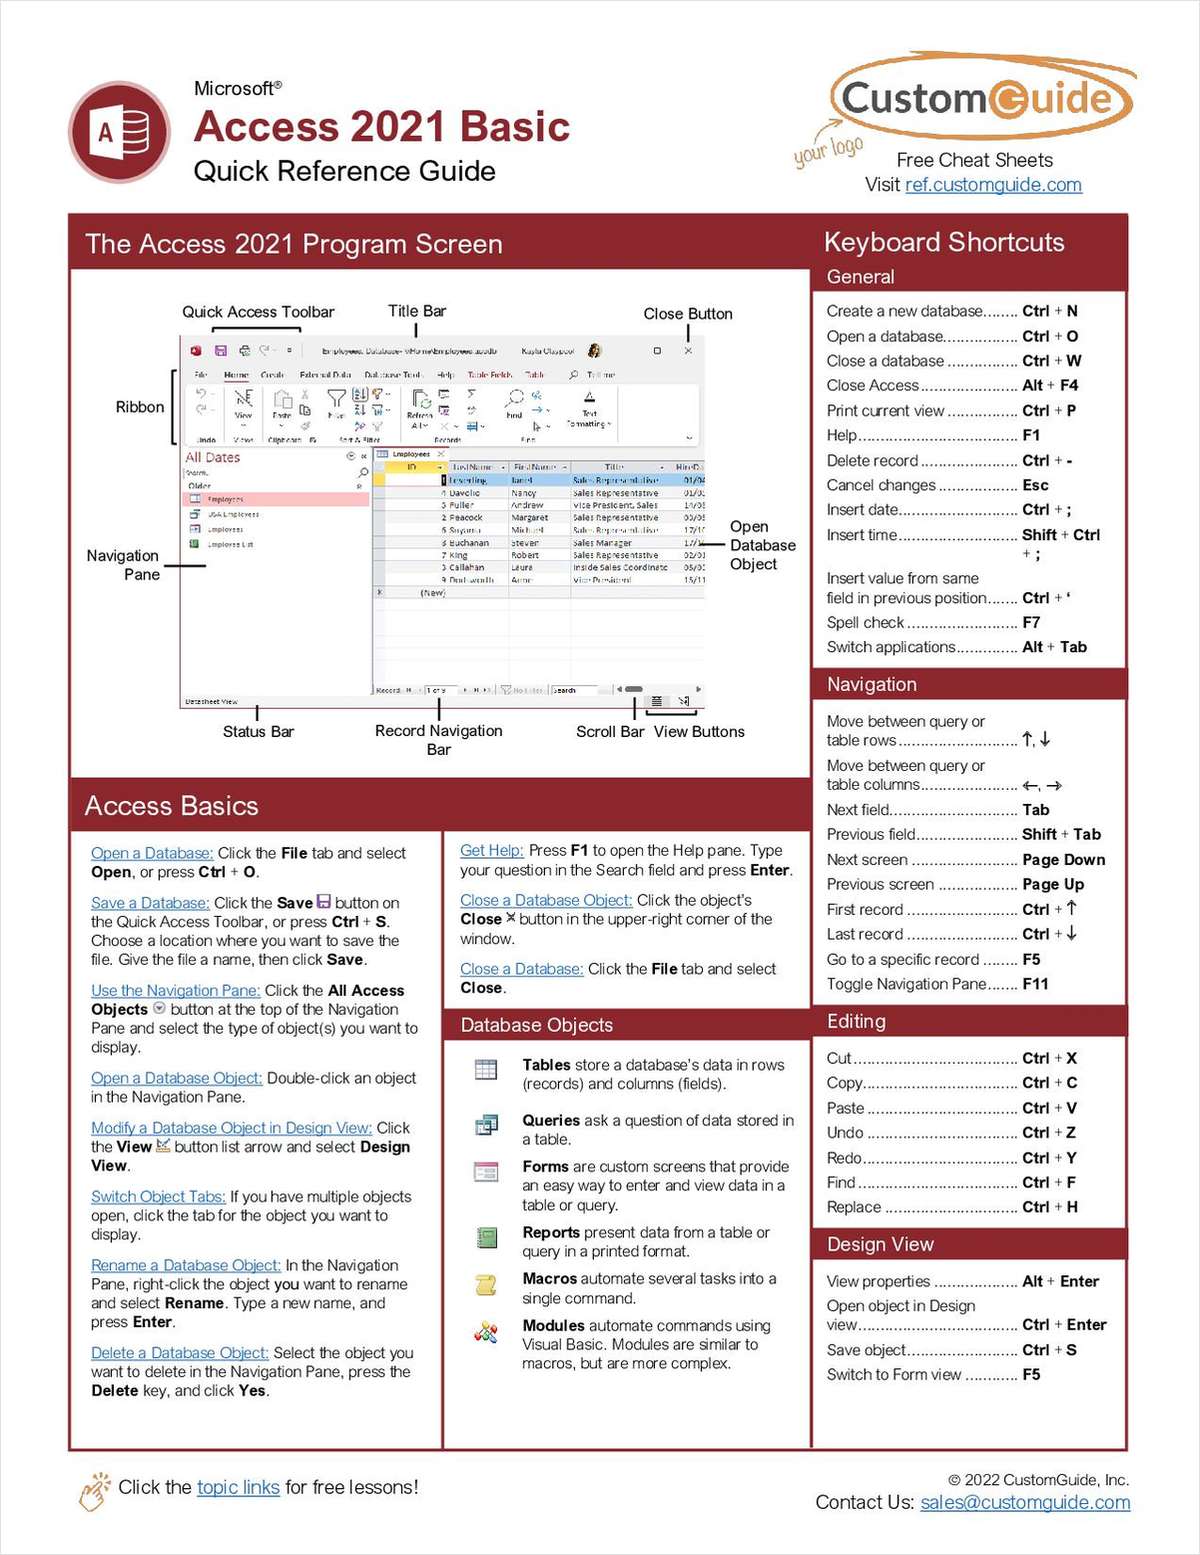 Microsoft Access 2021 Basic - Free Quick Reference Card